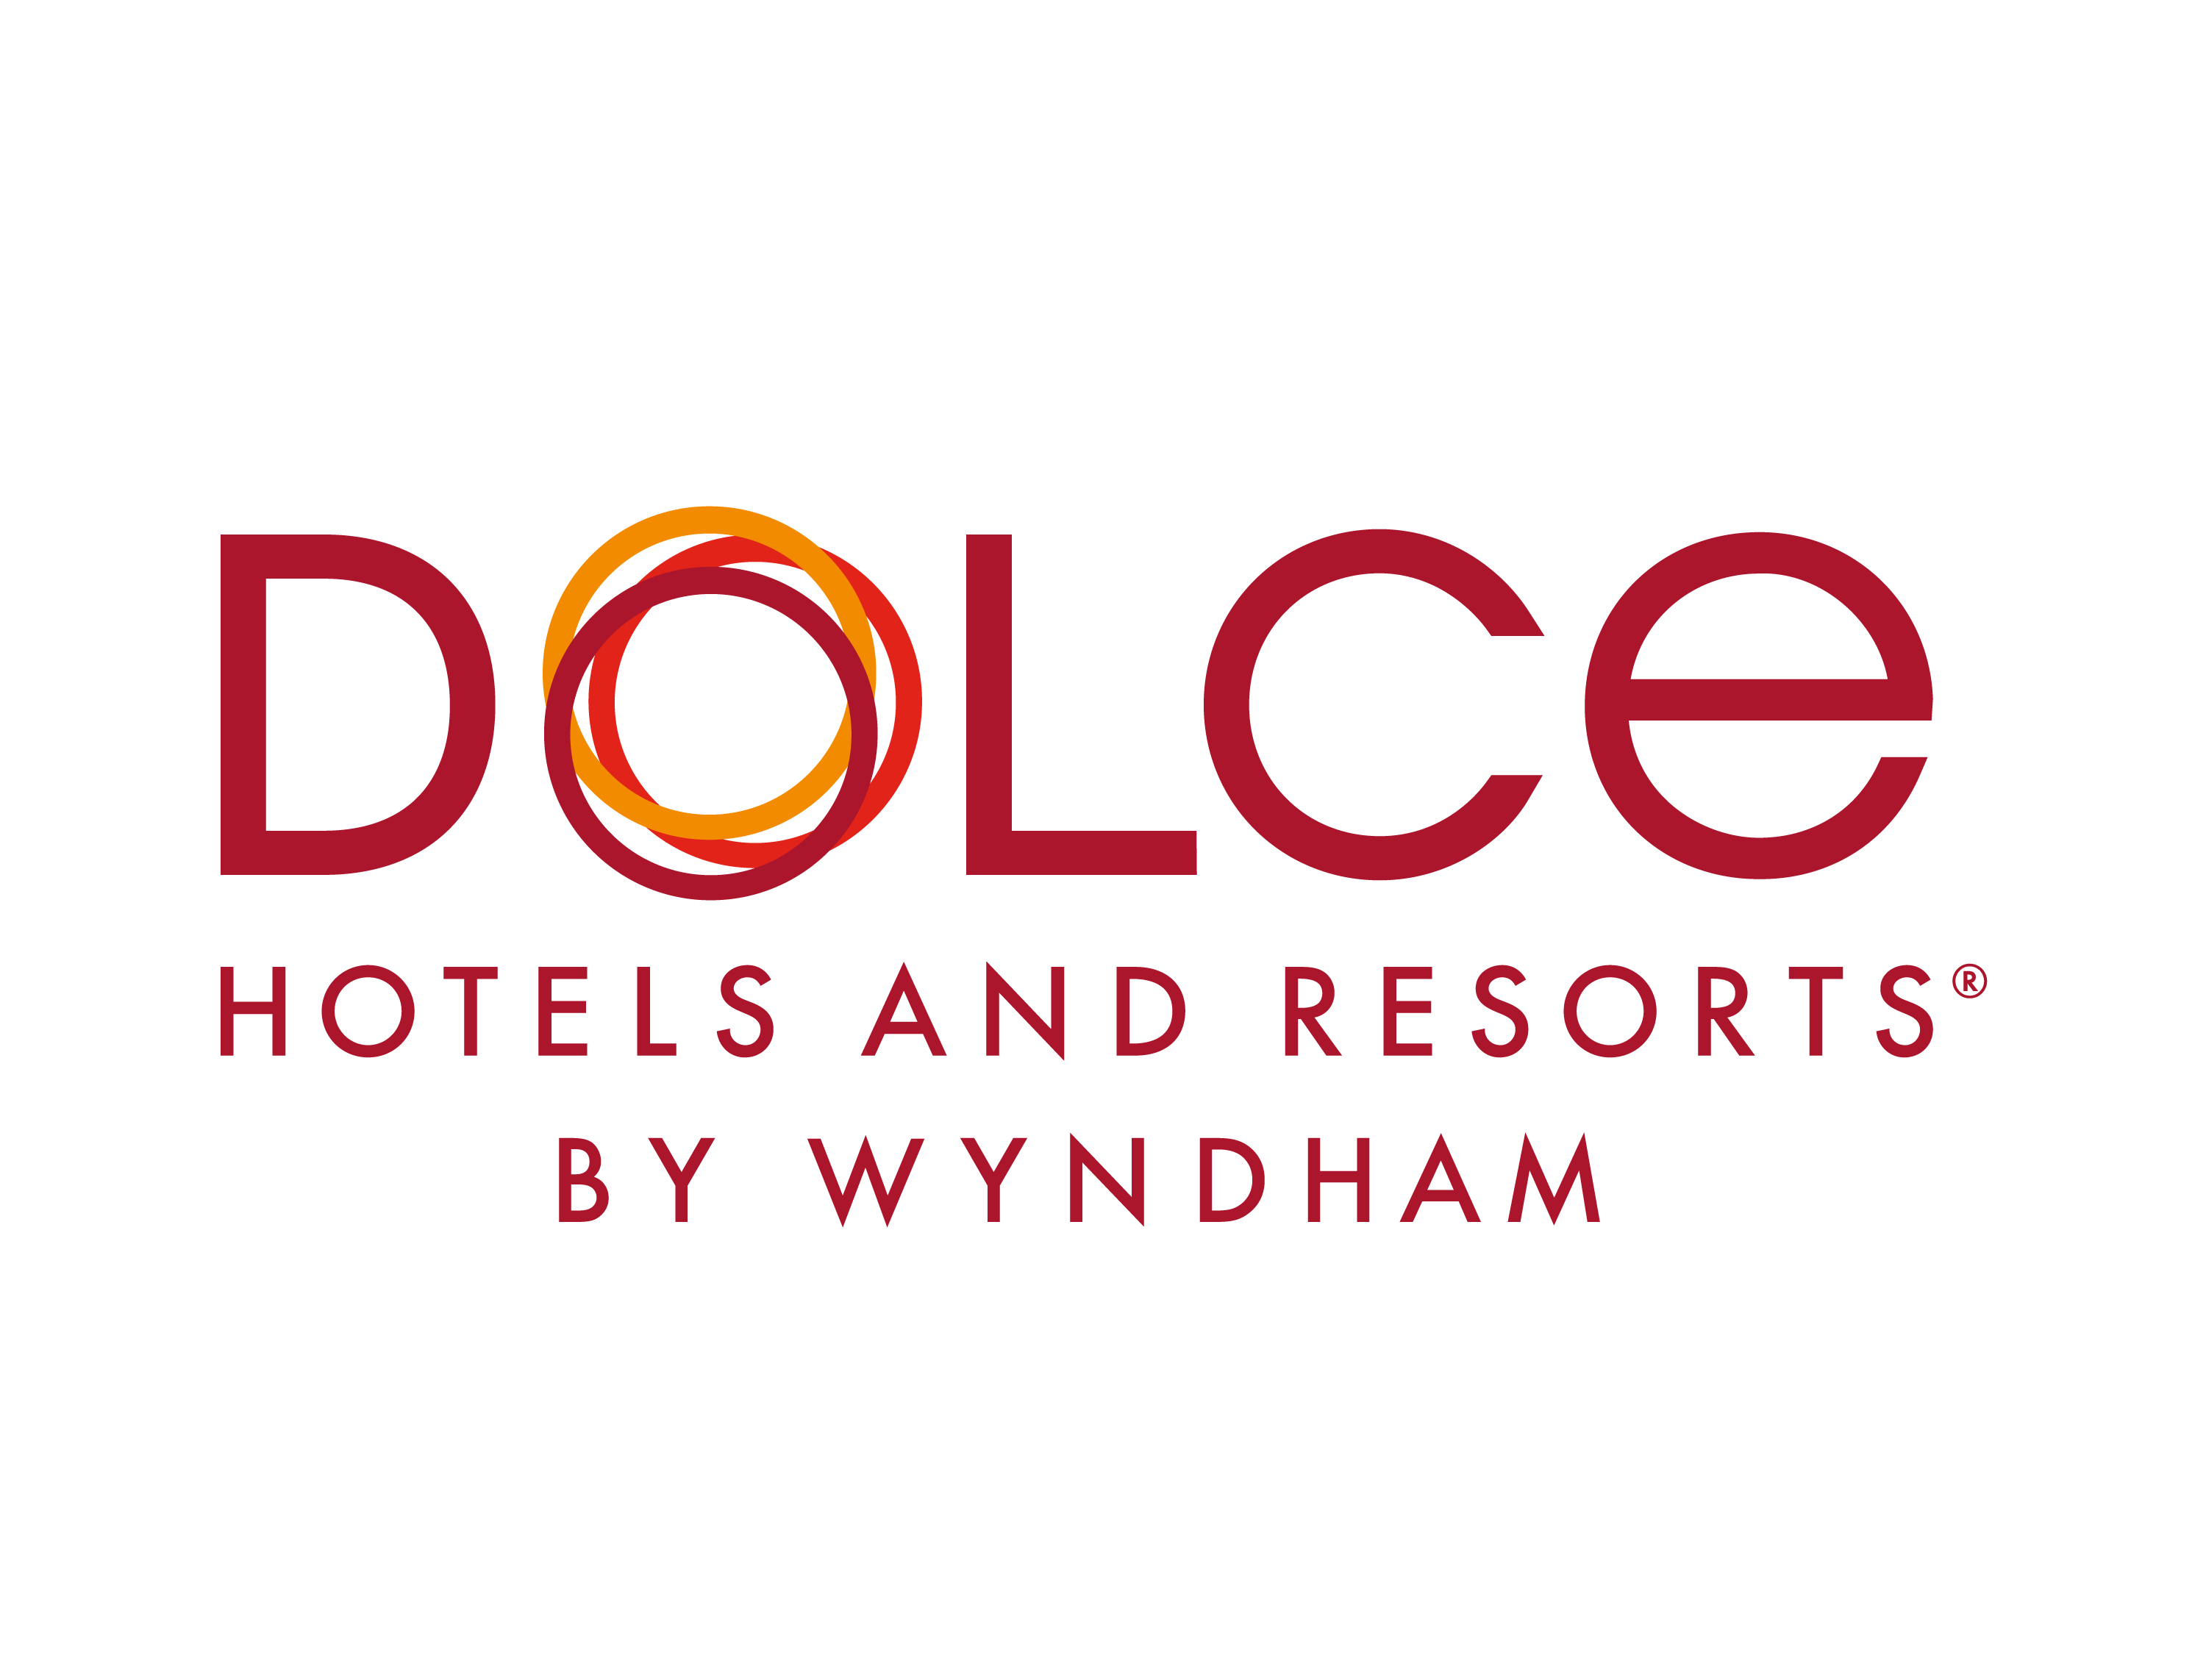 Dolce Hotels and Resort